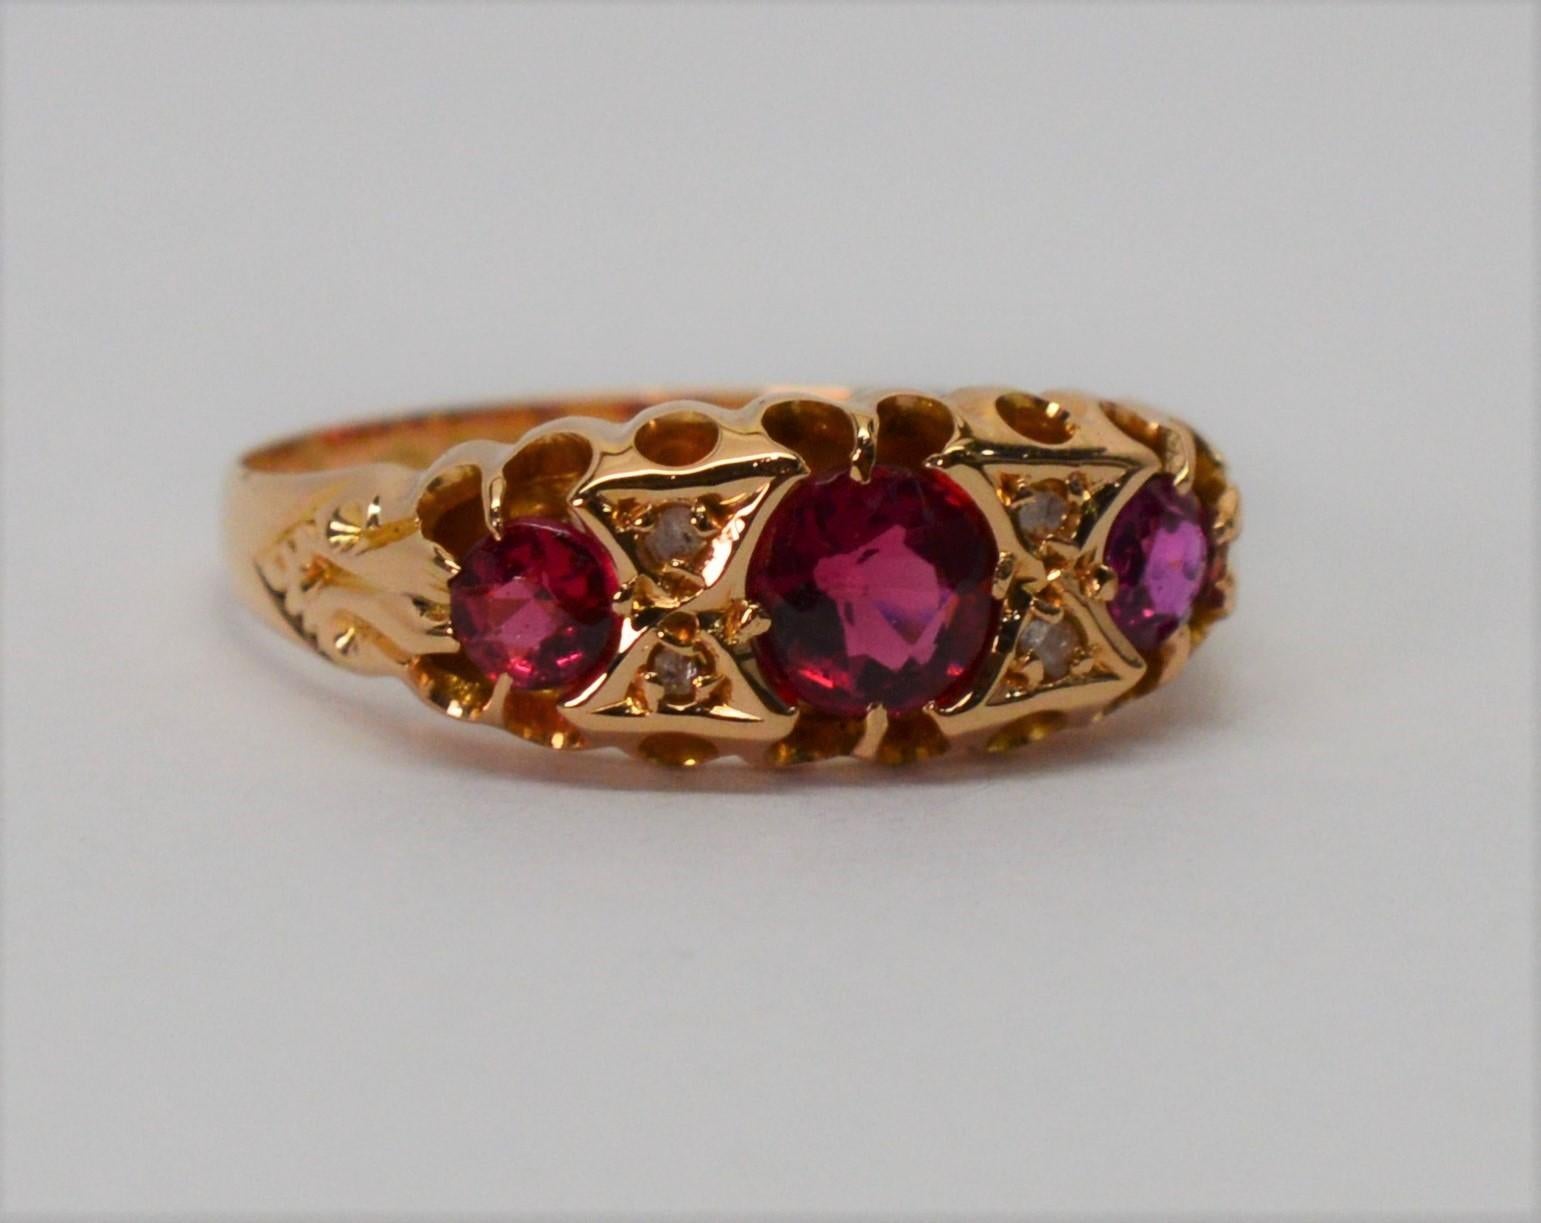 Three vibrant rose cut rubies are the feature of this fine Edwardian period eighteen karat 18k yellow gold ring. It's beautiful antique setting includes four .01 carat diamonds accents that further complement the colorful hand cut ruby gemstones,